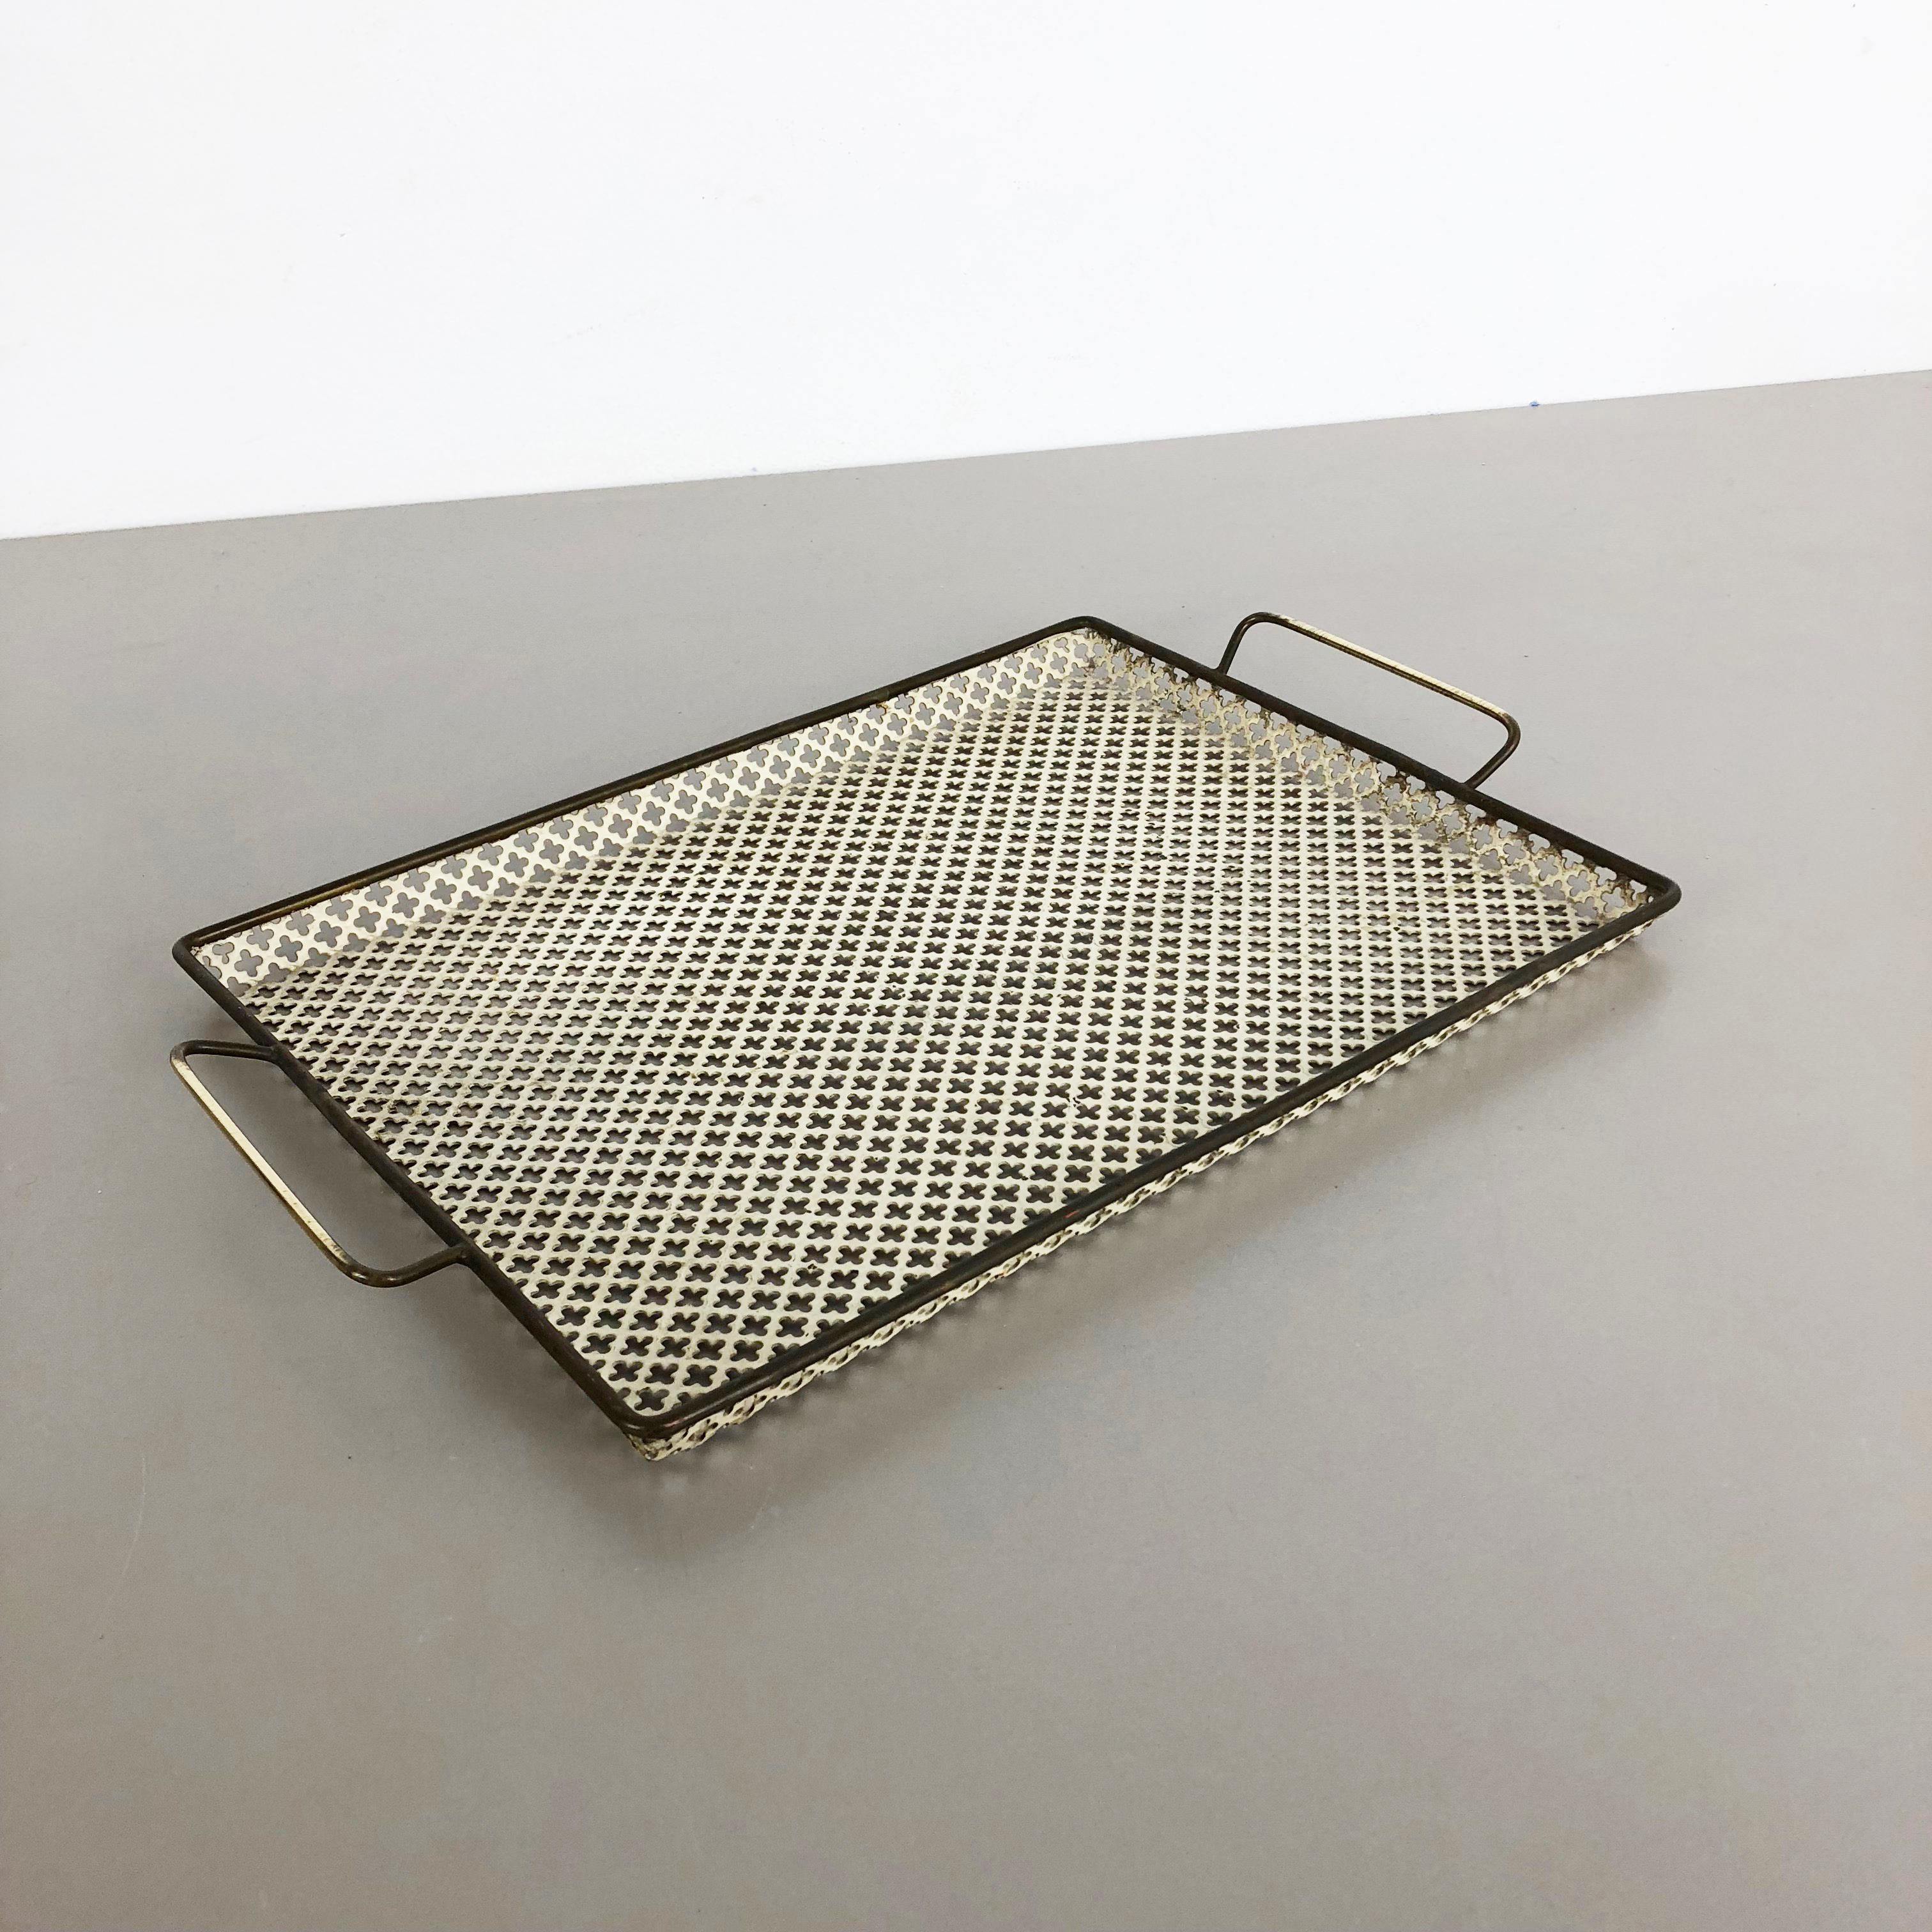 Metal tray.

In style of Mathieu Matégot.

Origin: France, 

1950s.

This original vintage tray element was produced in the 1960s in France. It was made of metal in whole pattern optic which is reminiscent with the designs by Mathieu